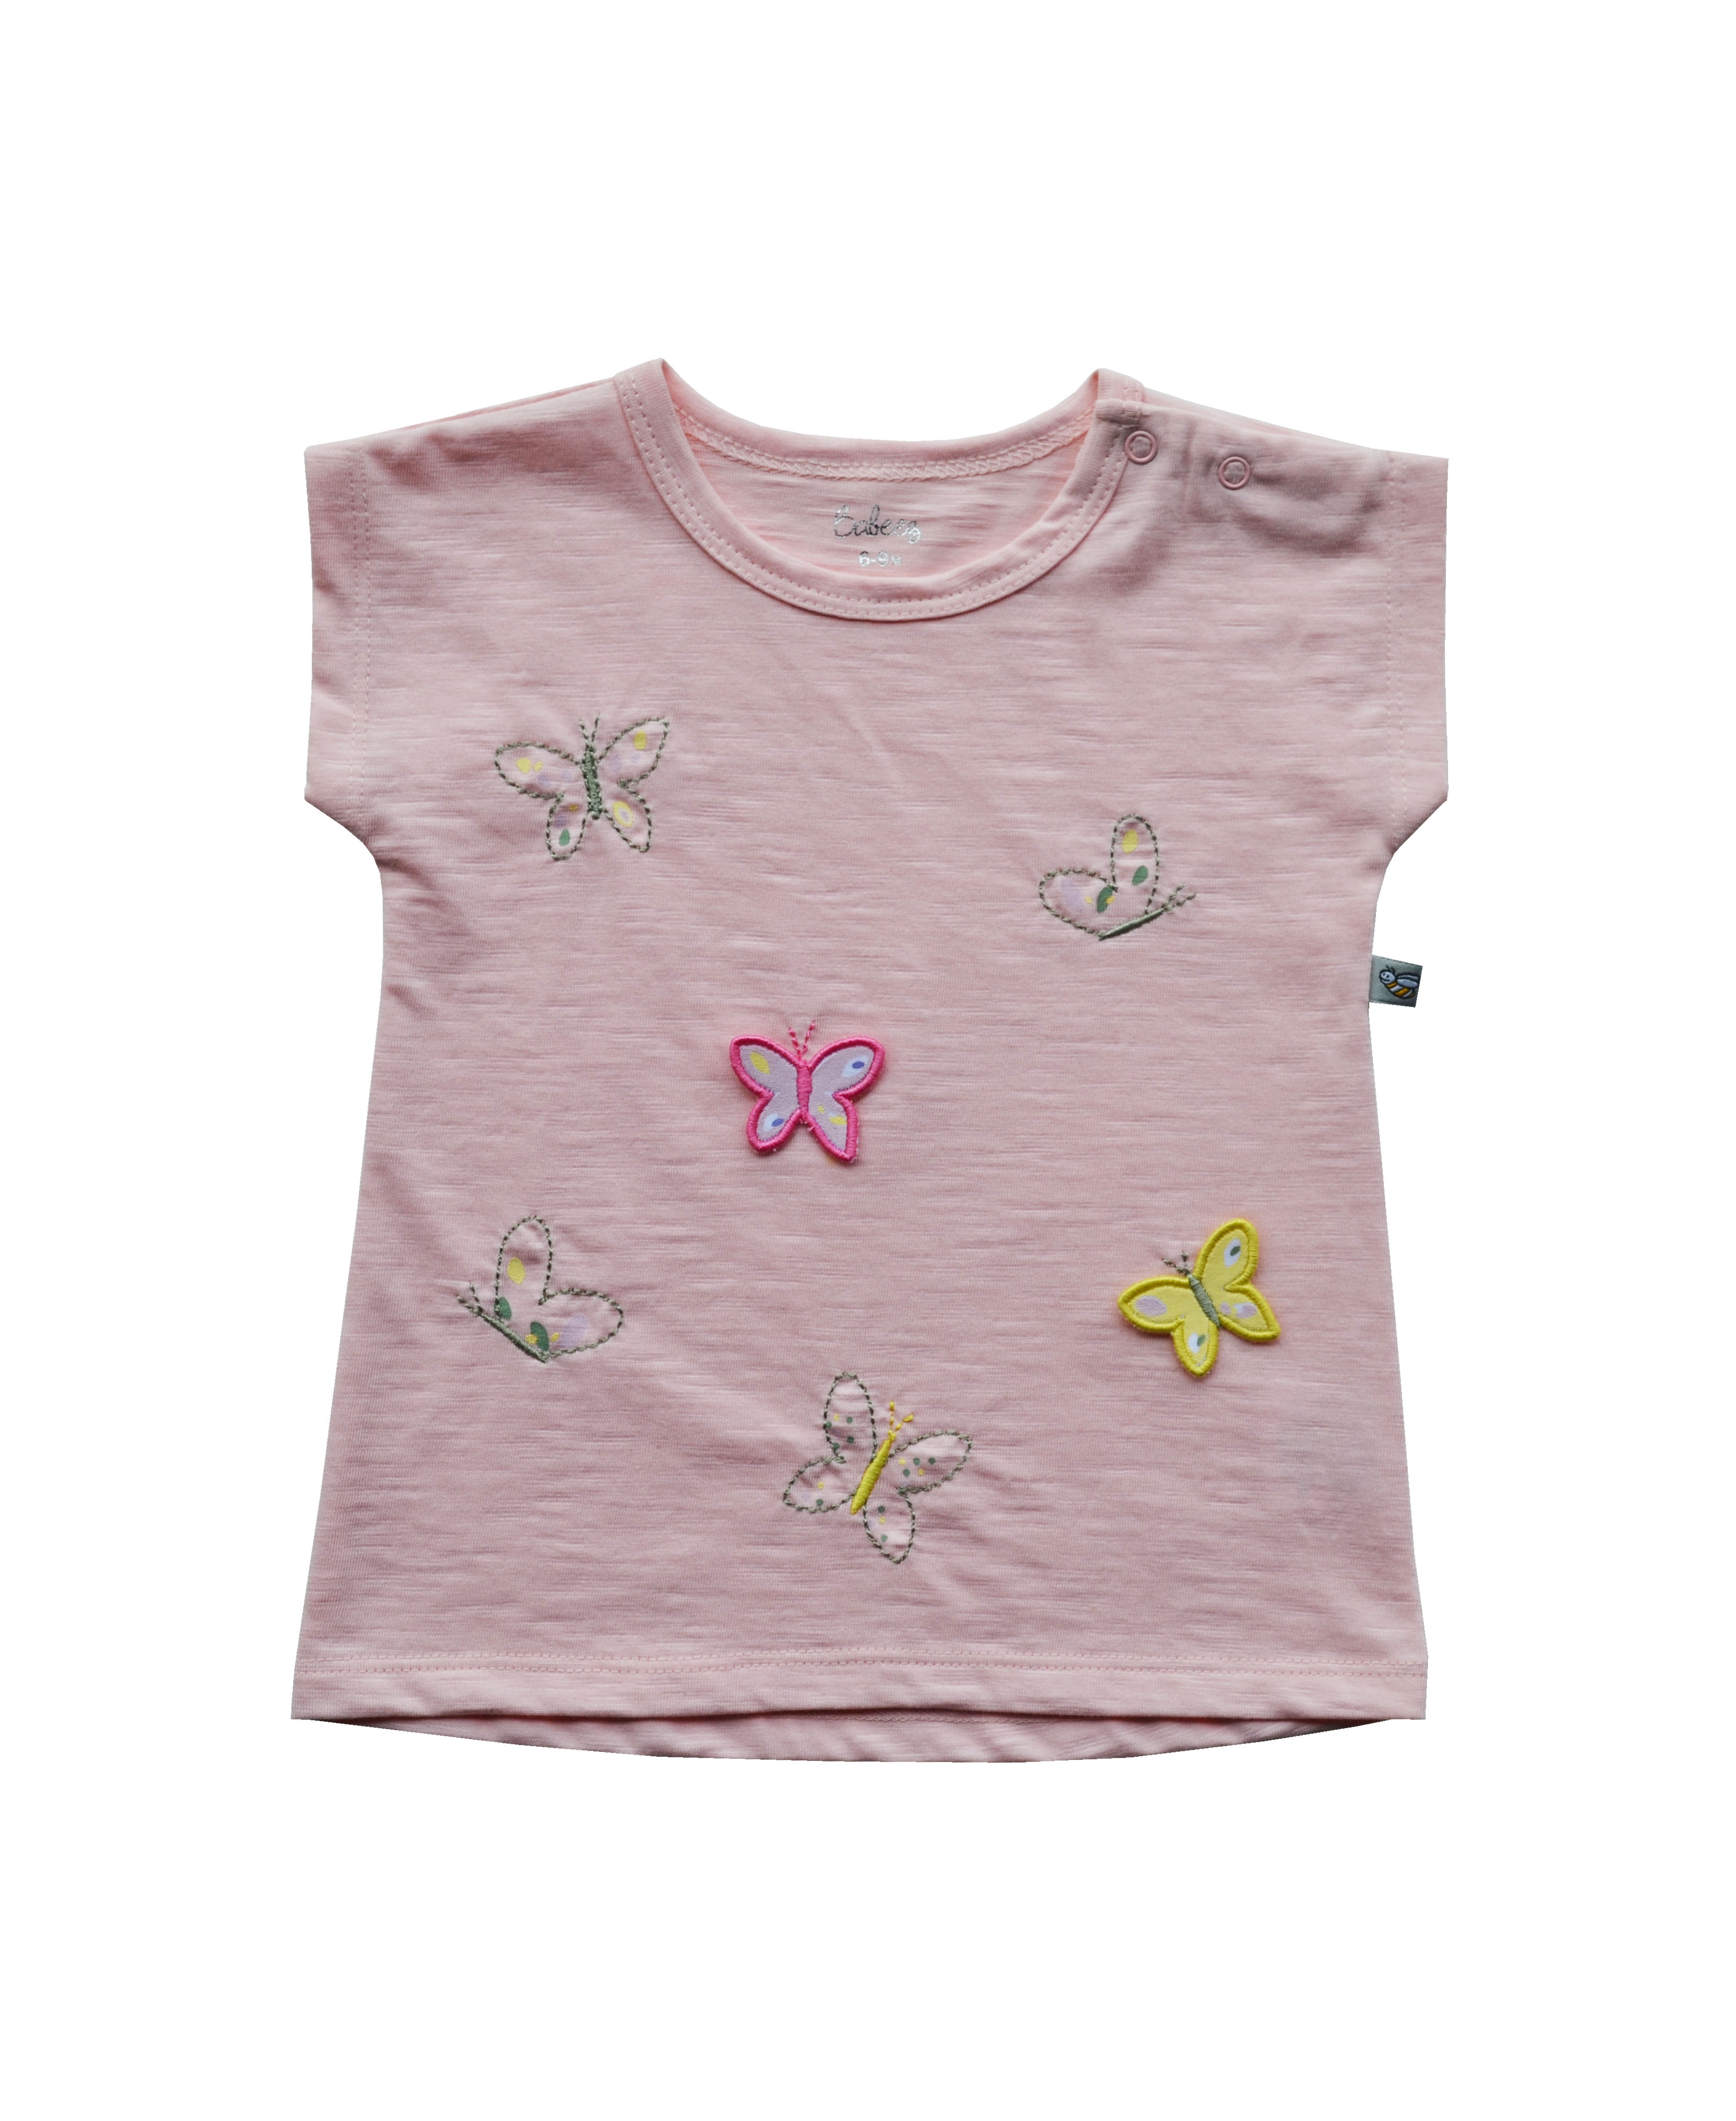 Babeez | Girls Pink Top with Butterfly Applique (Slub Jersey) undefined